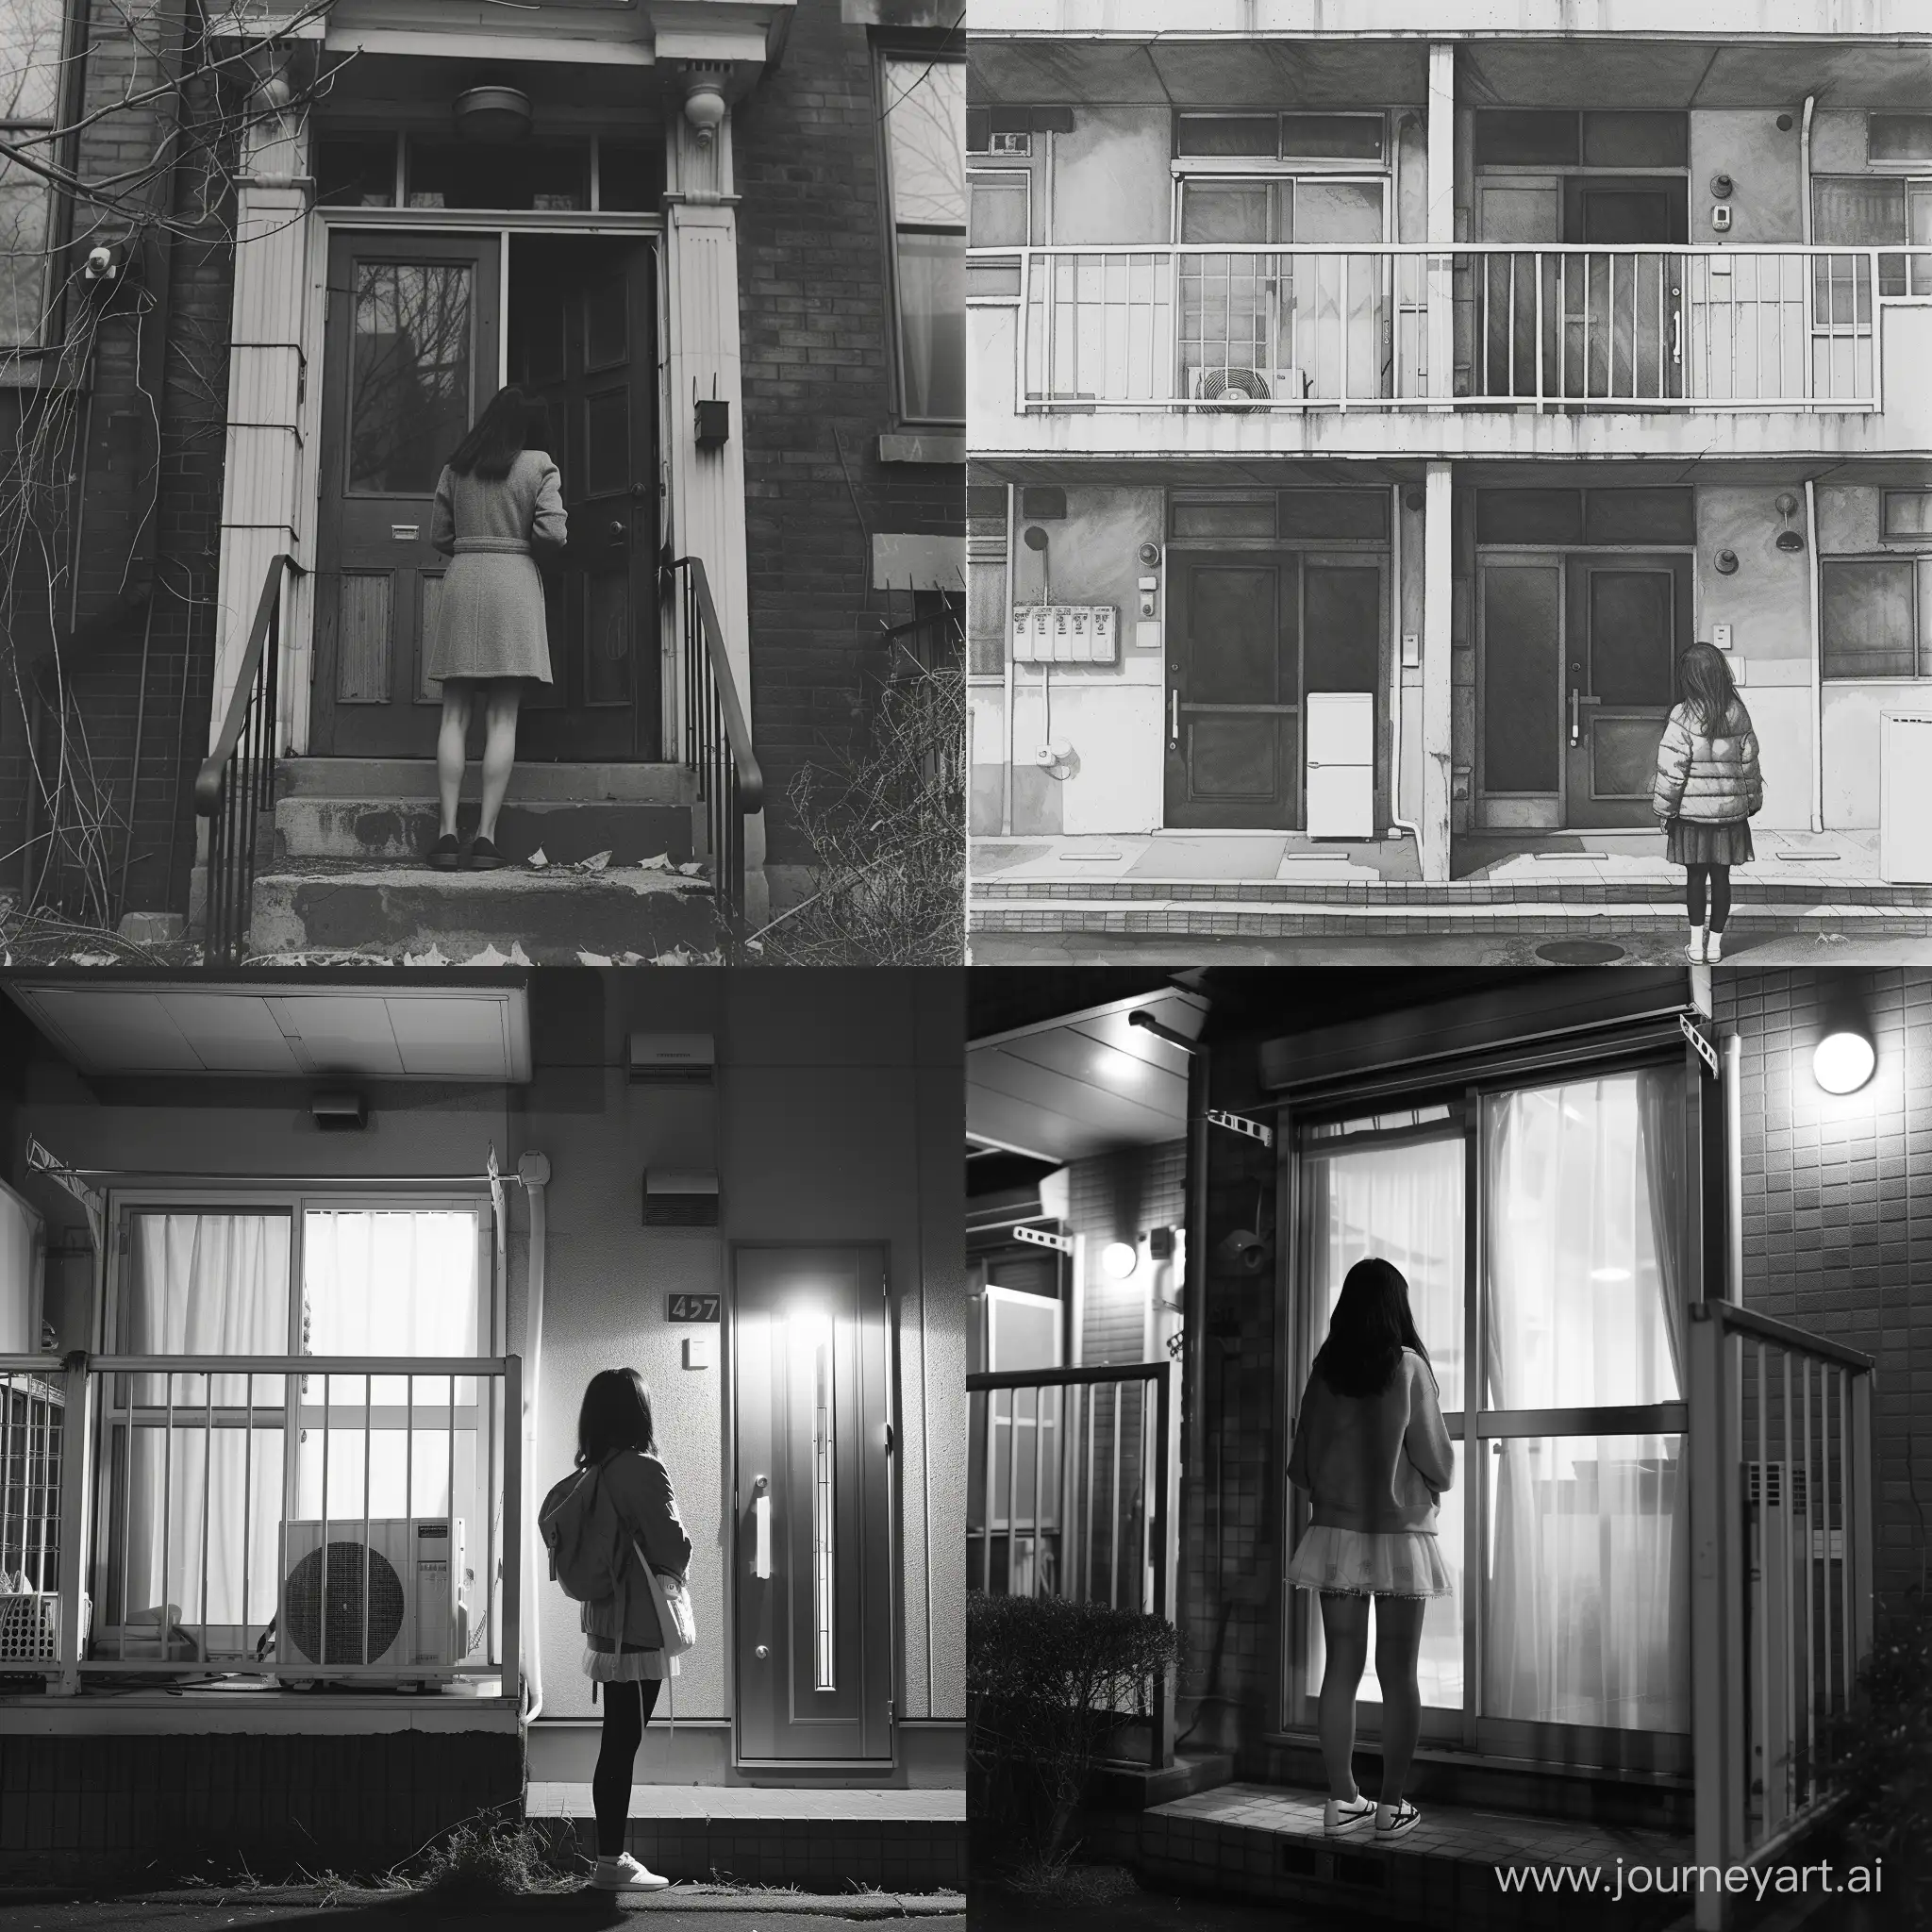 The girl is standing at the front apartment, she's in her outerwear